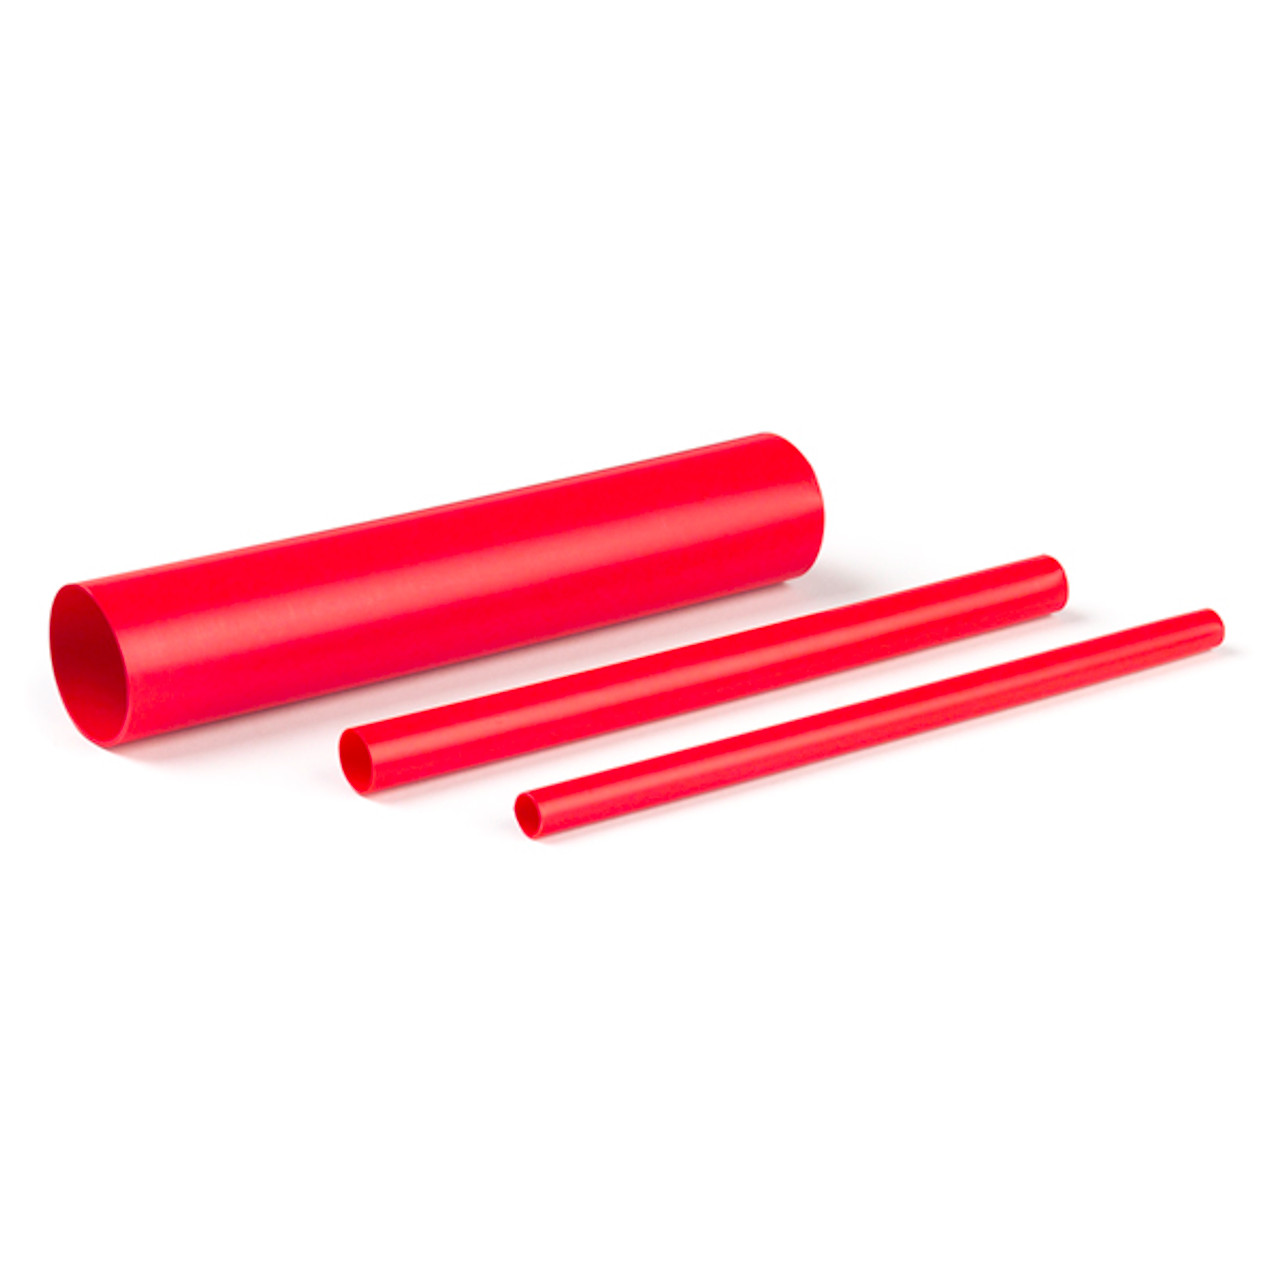 1/8" Dual Wall 3:1 Heat Shrink Tubing 48" @ 6 Pack - Red  84-6106-48